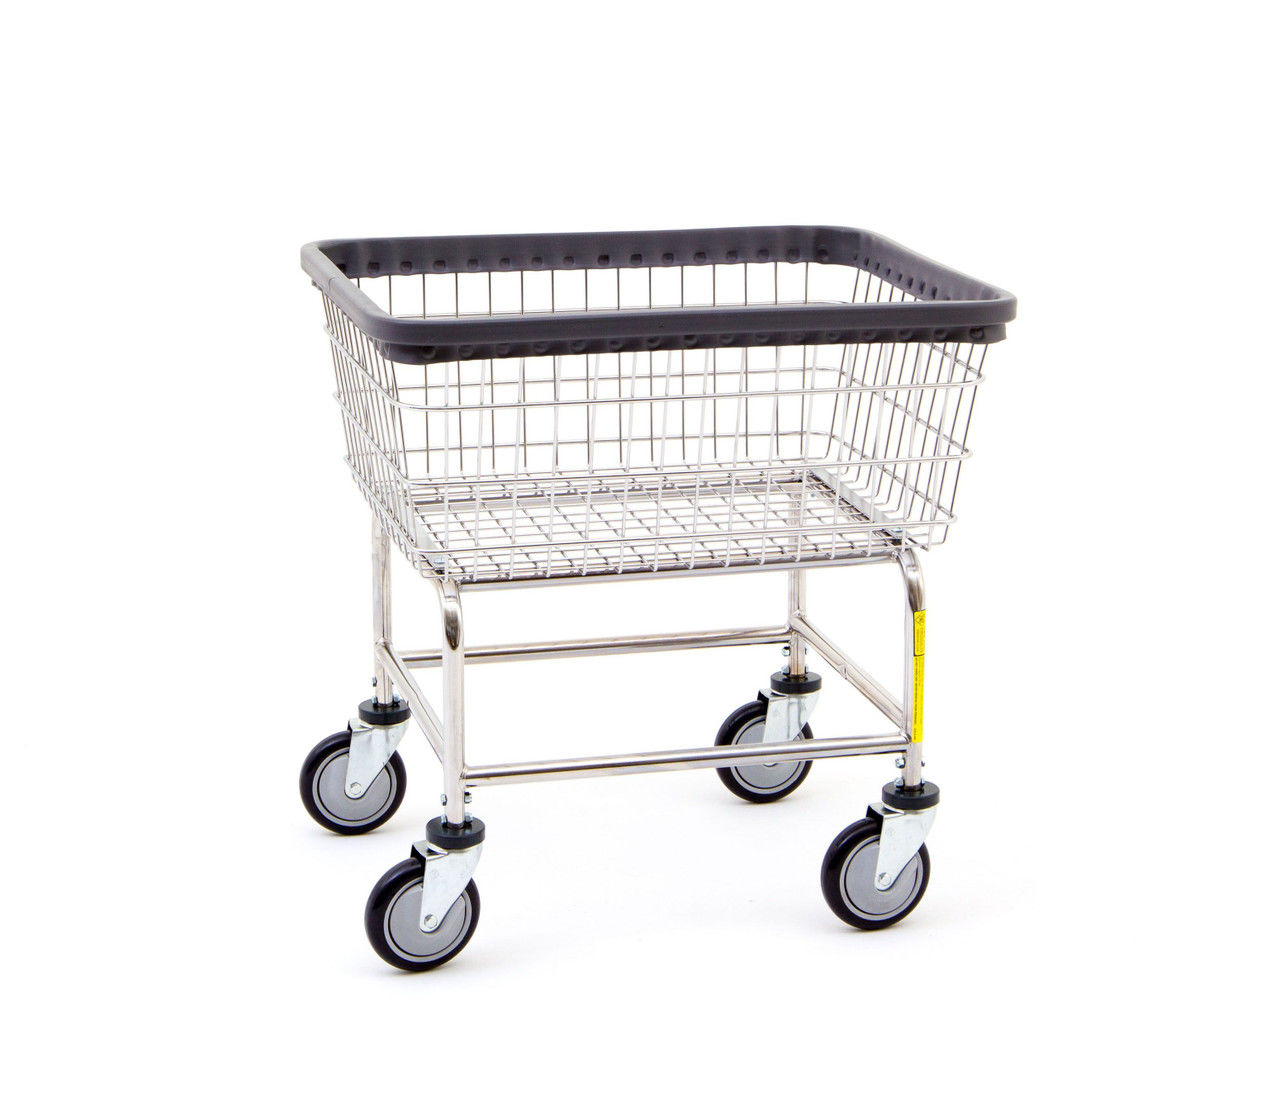 Is this laundry cart on wheels suitable for use in coin laundries?